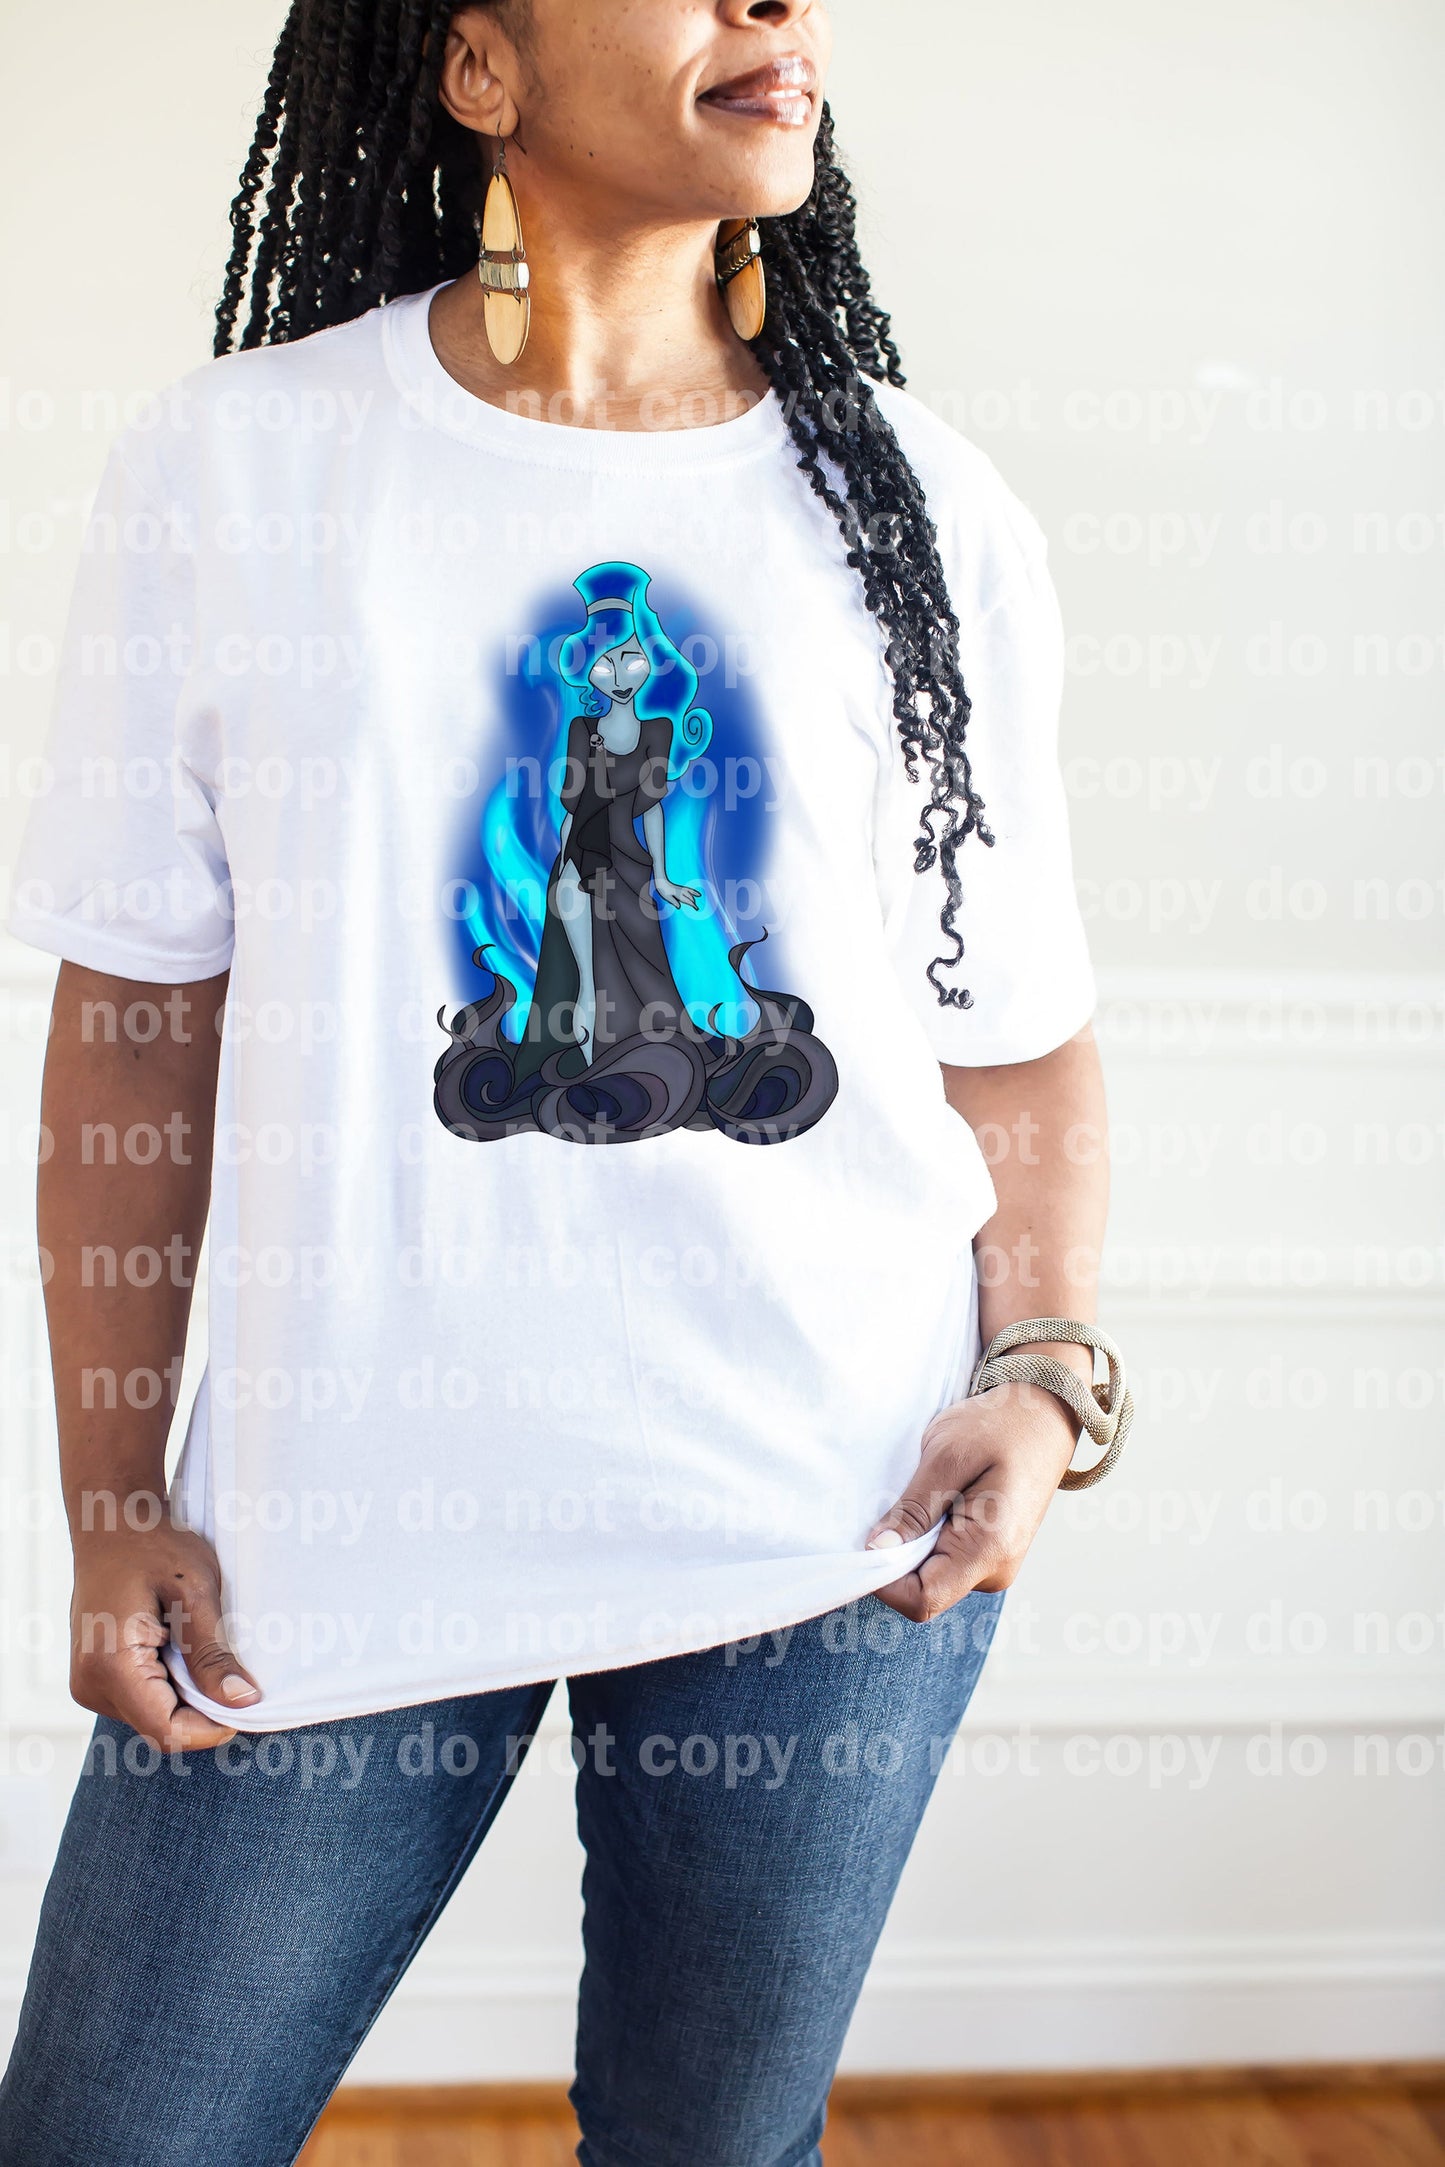 Hades Witch Dream Print or Sublimation Print